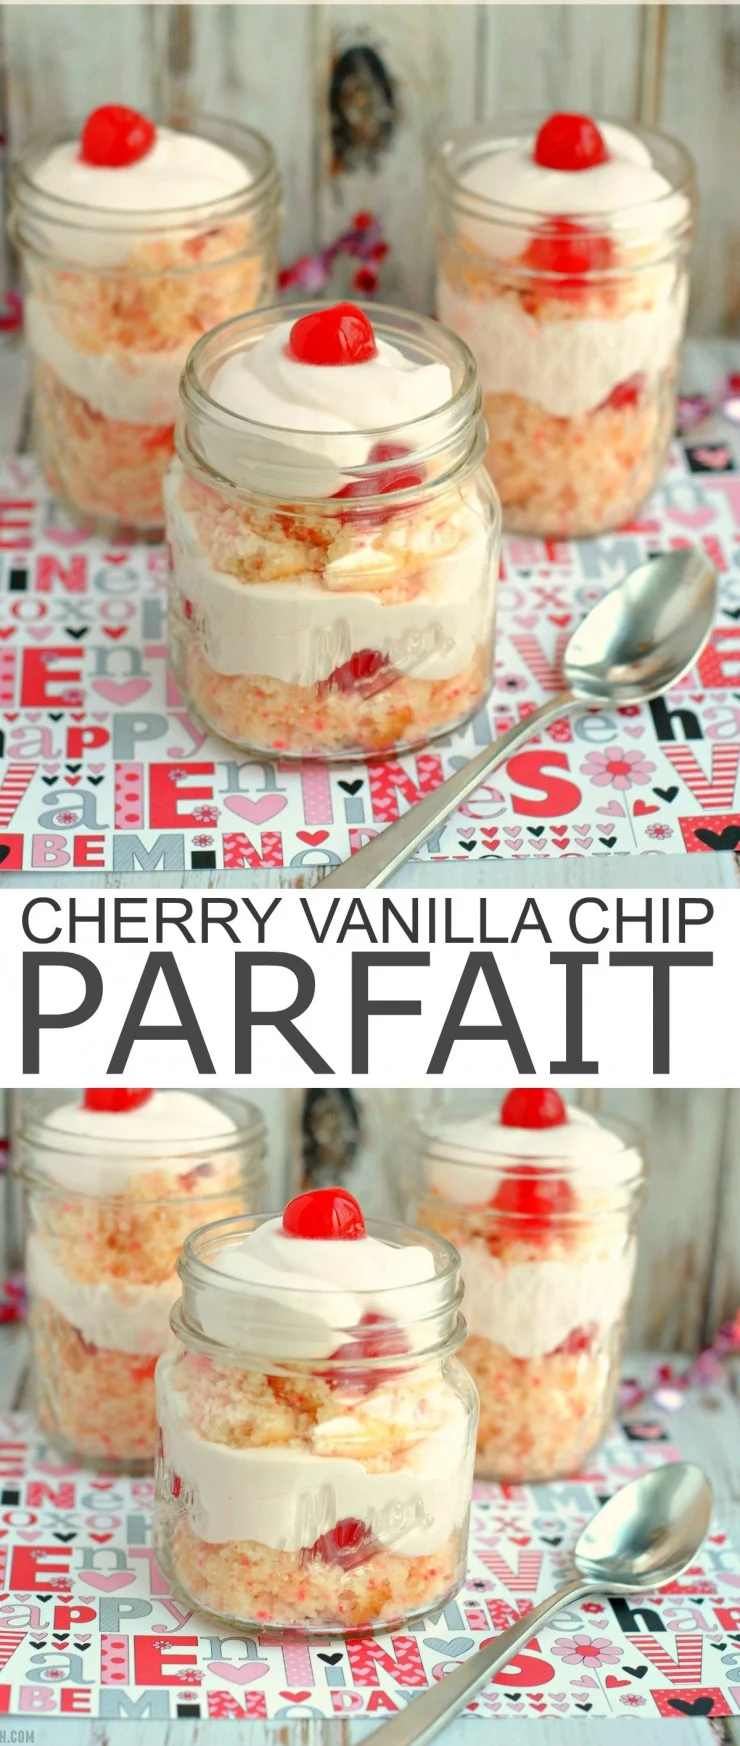 This Cherry Vanilla Chip Parfait is an easy but romantic dessert I wanted to share with you just in time for Valentine's Day.